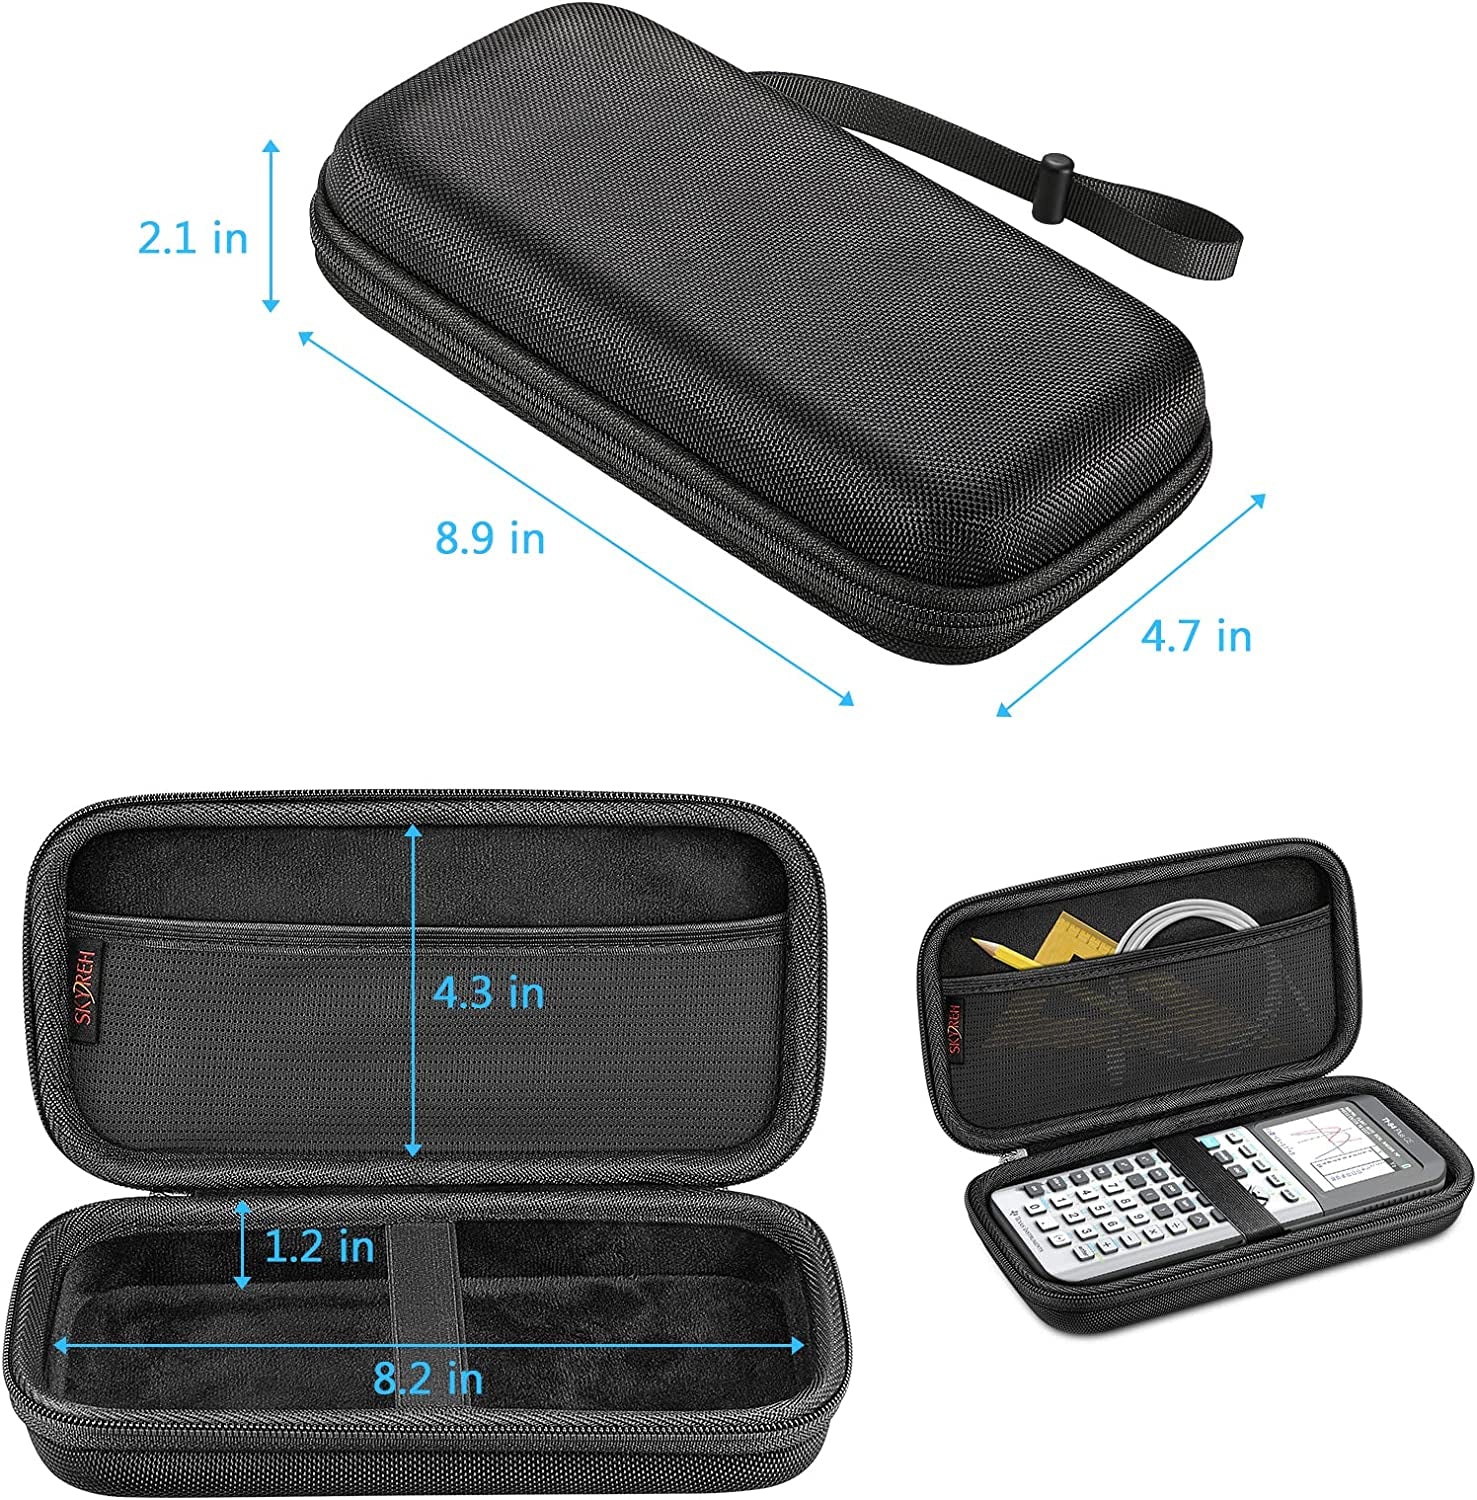 Graphing Calculator Carrying Case for TI-84 plus CE, Hard EVA Shockproof Protective Case for Texas Instruments TI-84 plus CE/TI-83 plus Ce/Ti-Nspire CX II Cas/Tl-Nspire-Cx-Ll (Black)